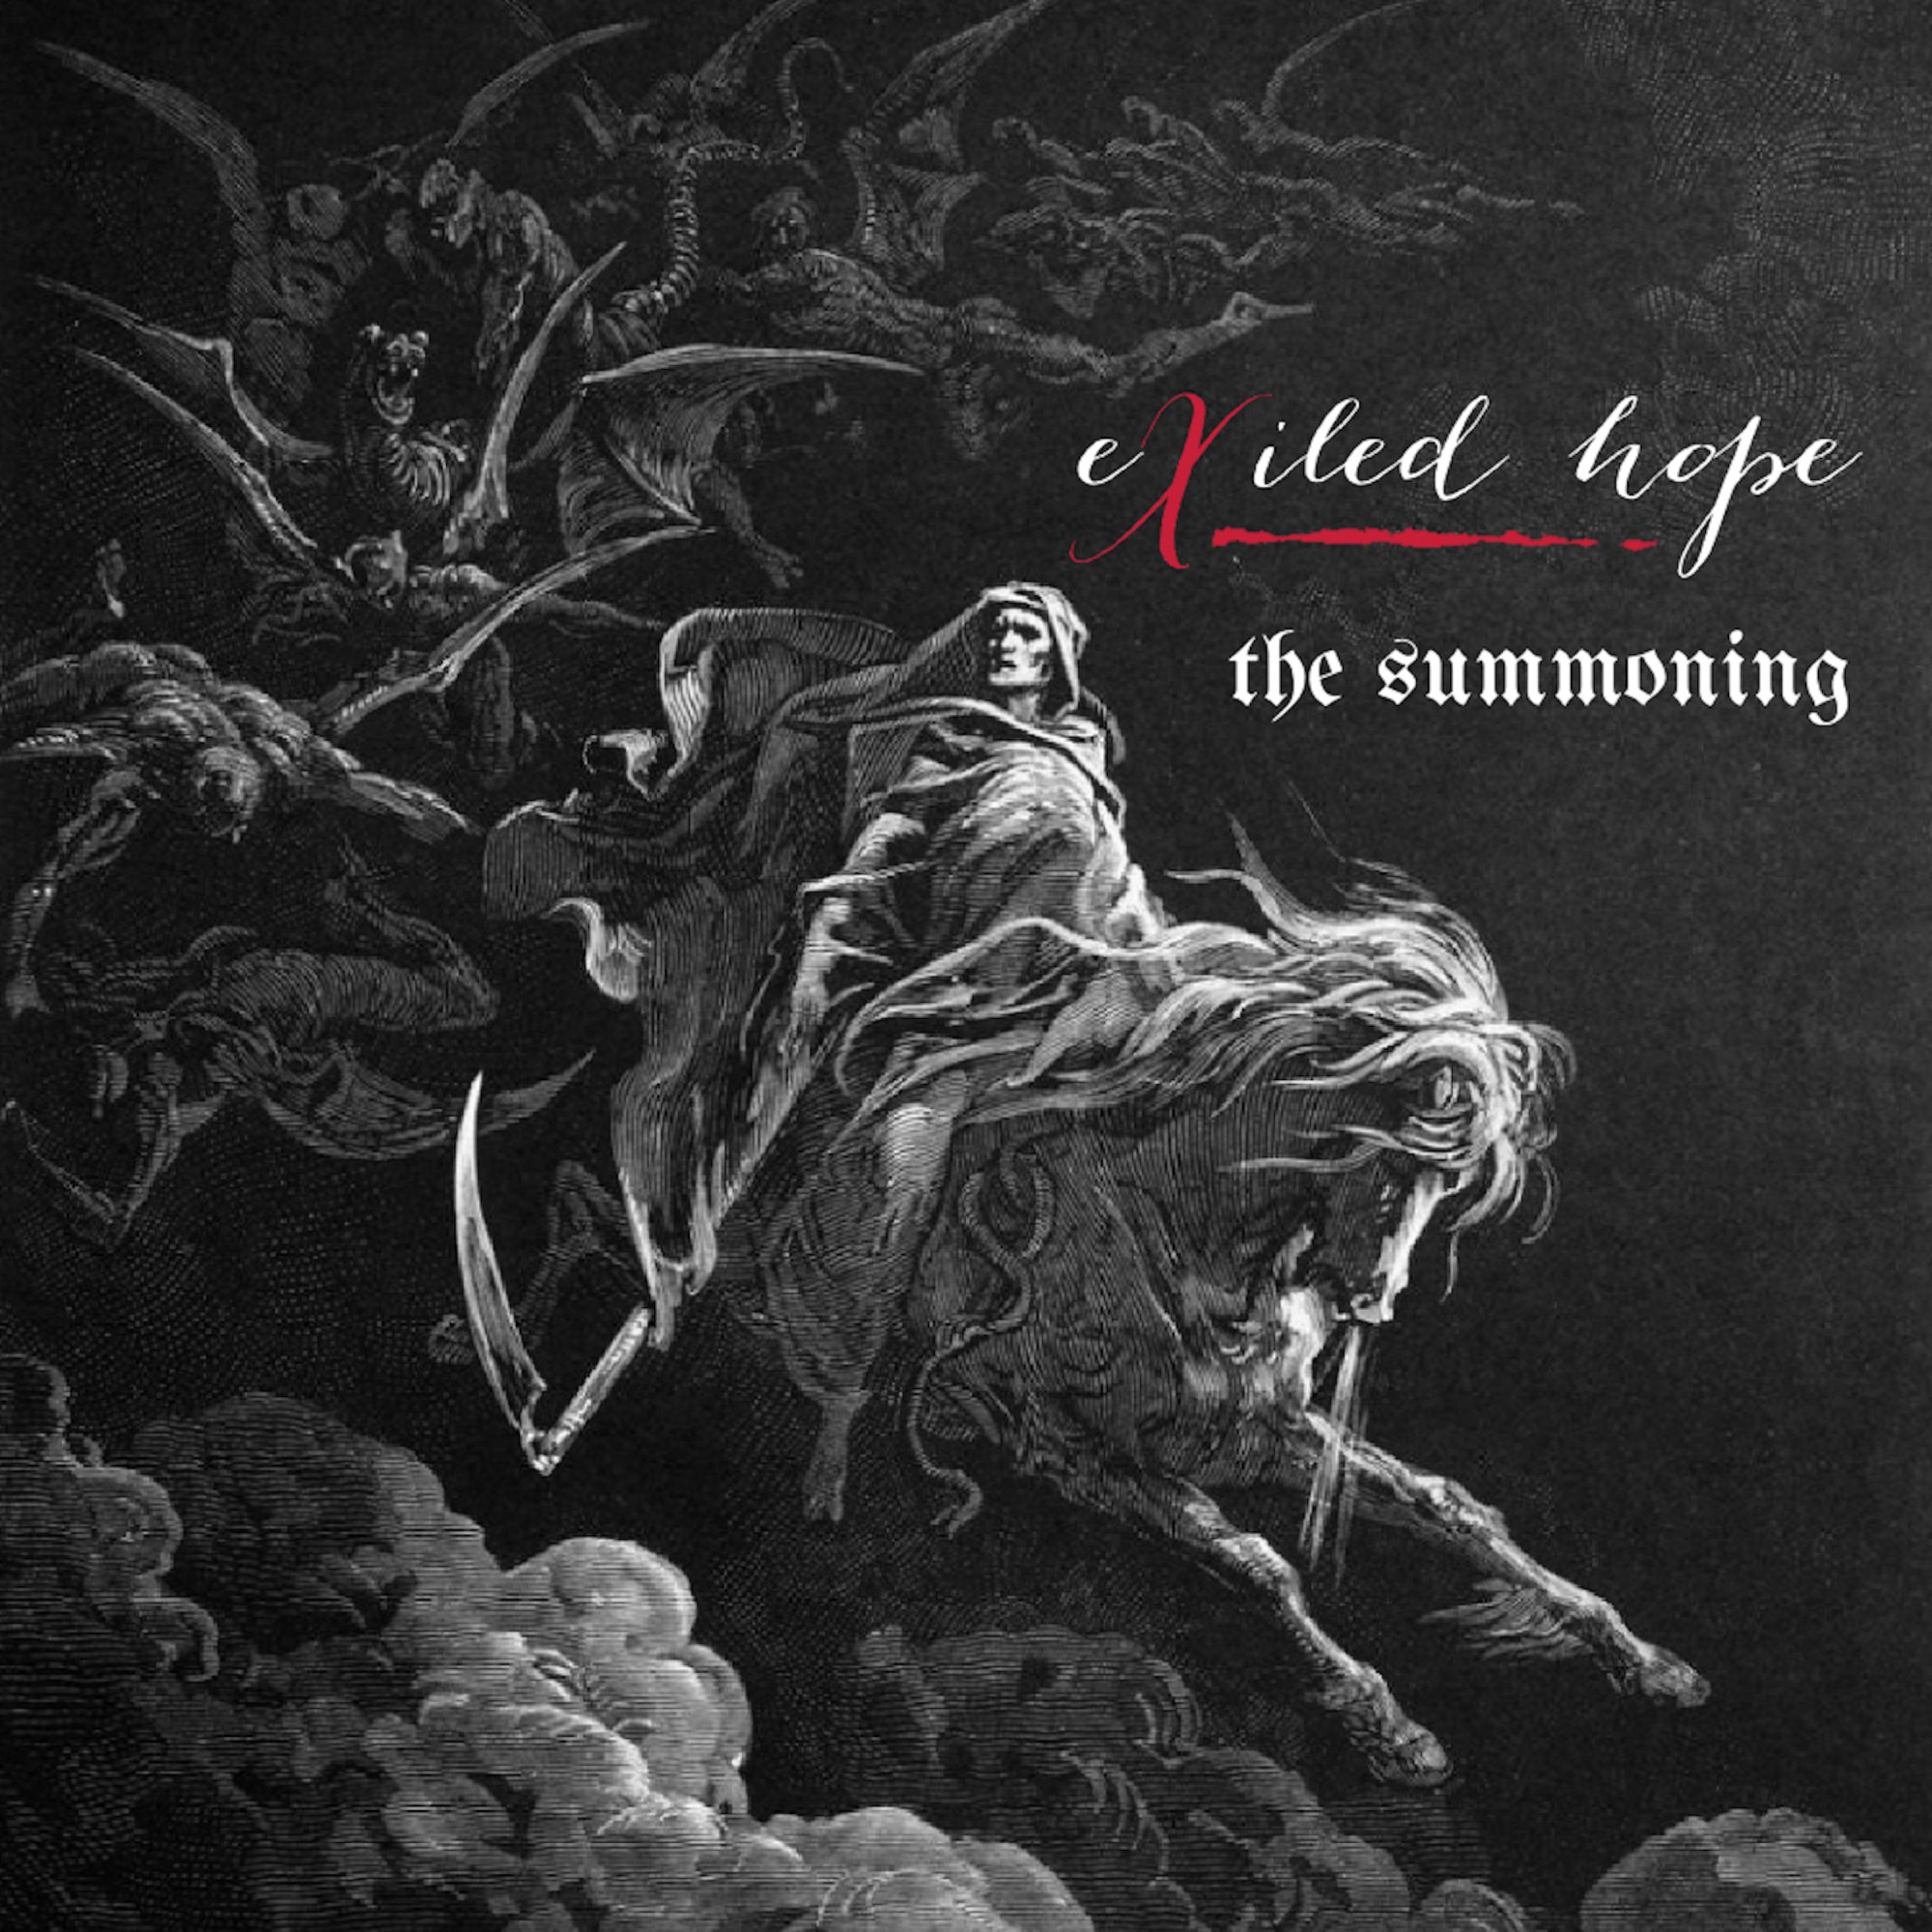 LISTEN: “The Summoning” by Exiled Hope